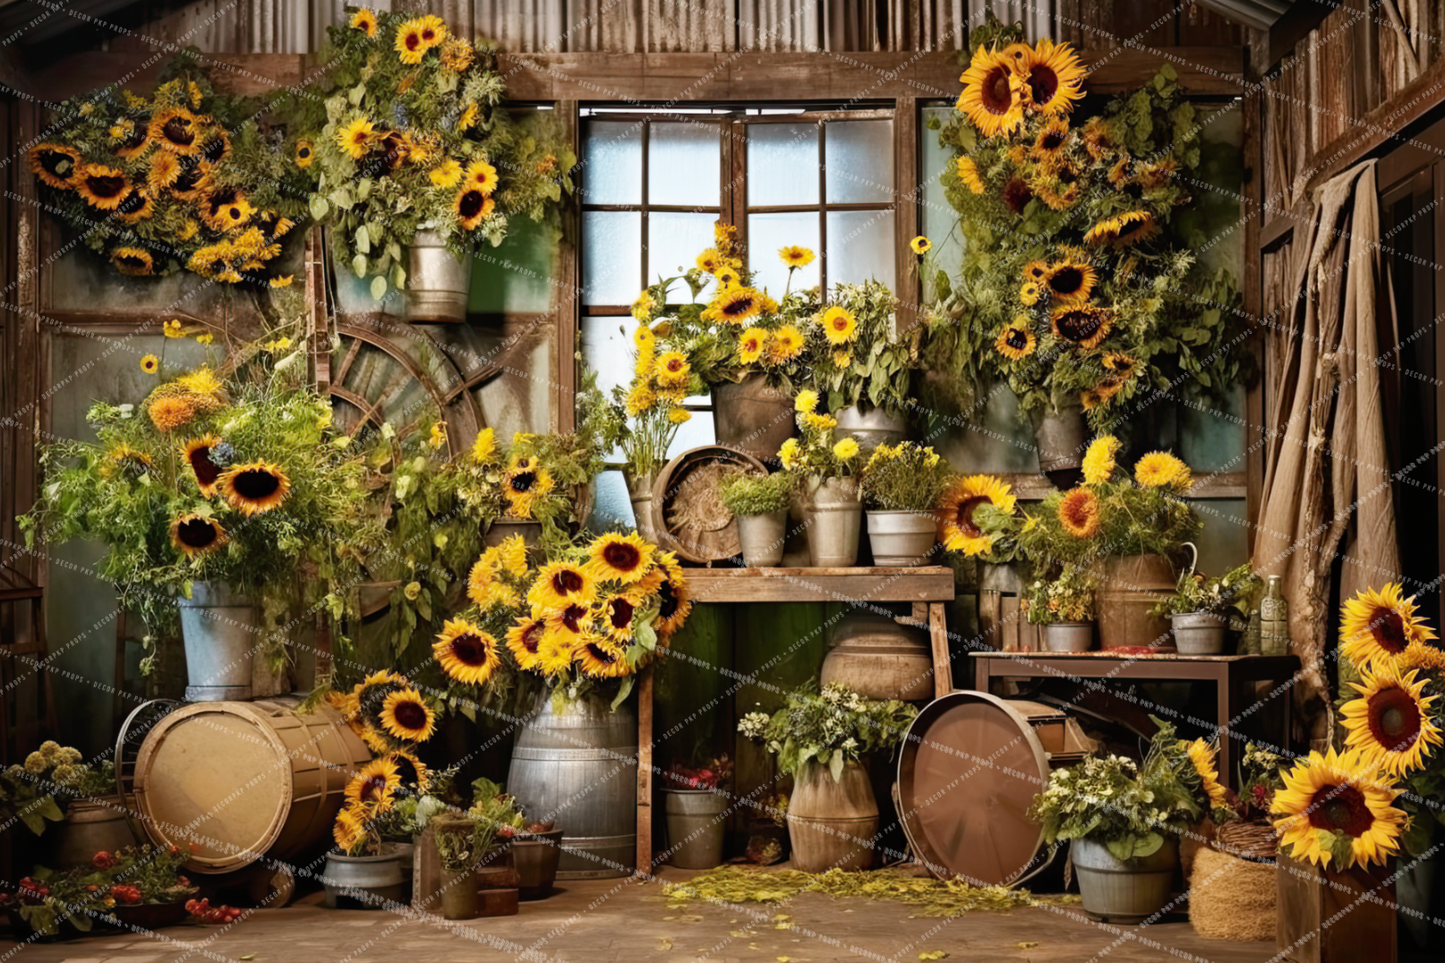 SUNFLOWERS SHED - PKP